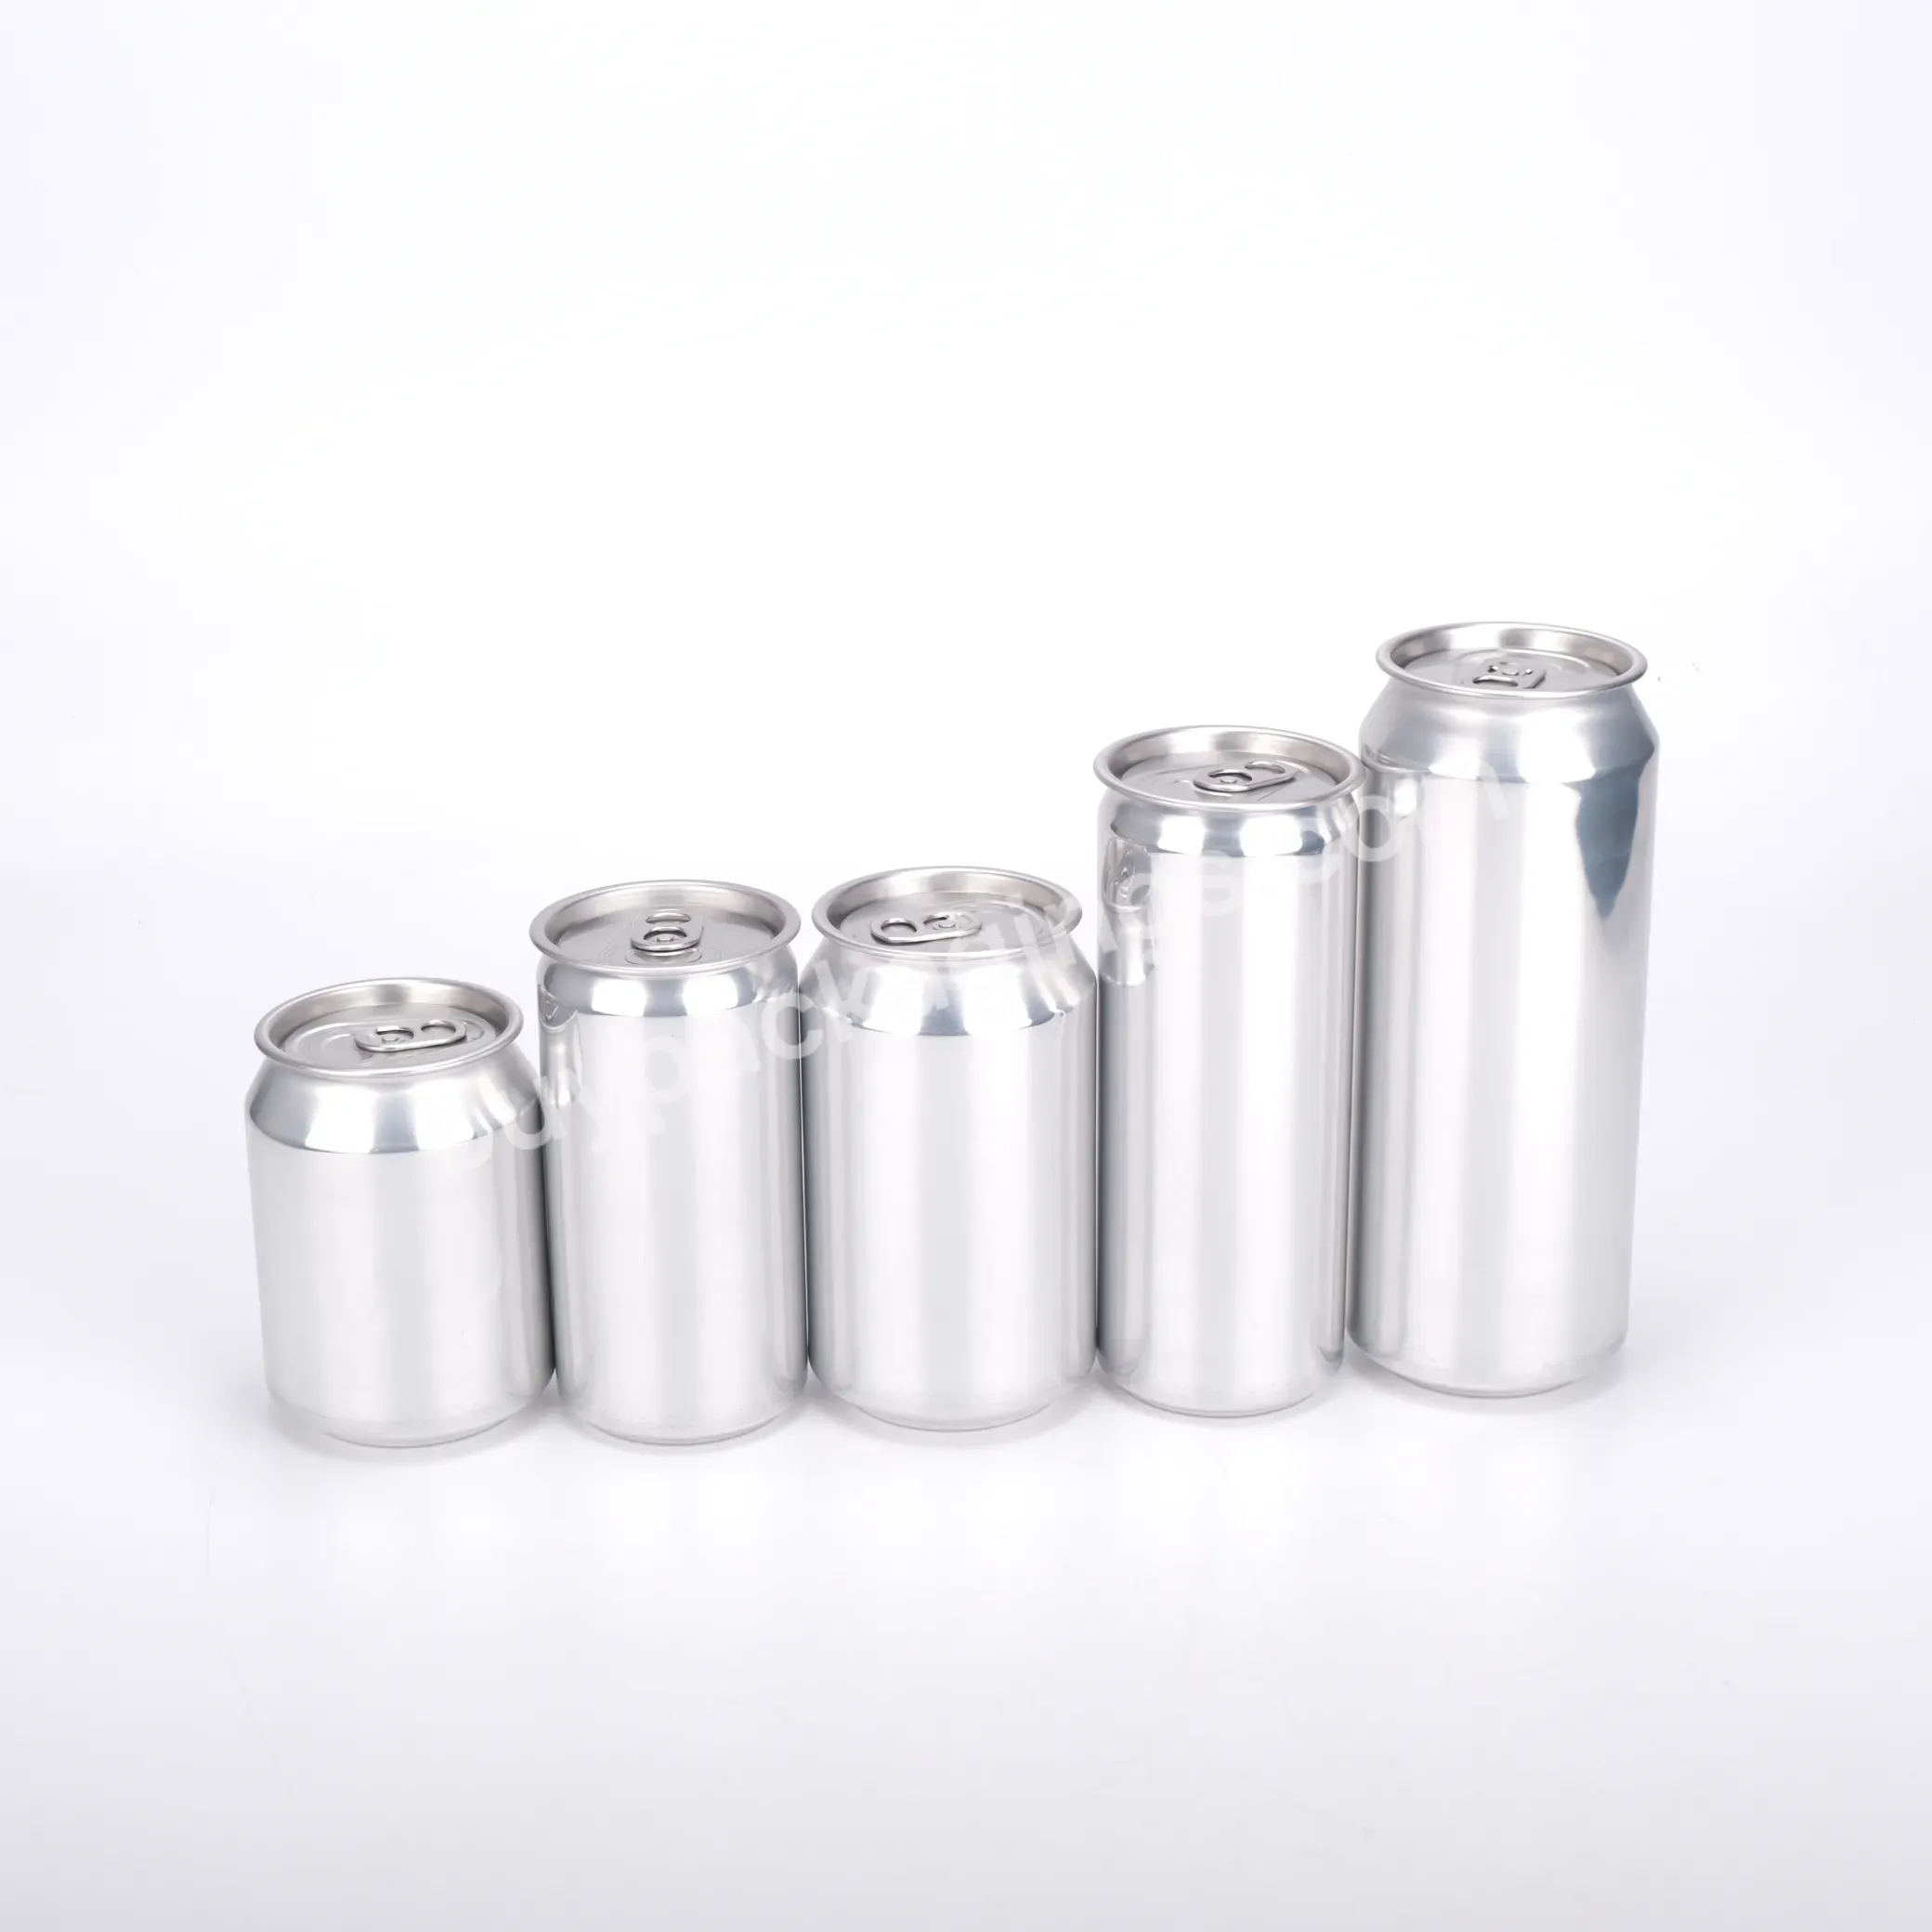 Aluminium Sleek Cans Beverage Cans For Soda Coca Food Fruit Manufacturer Empty Can